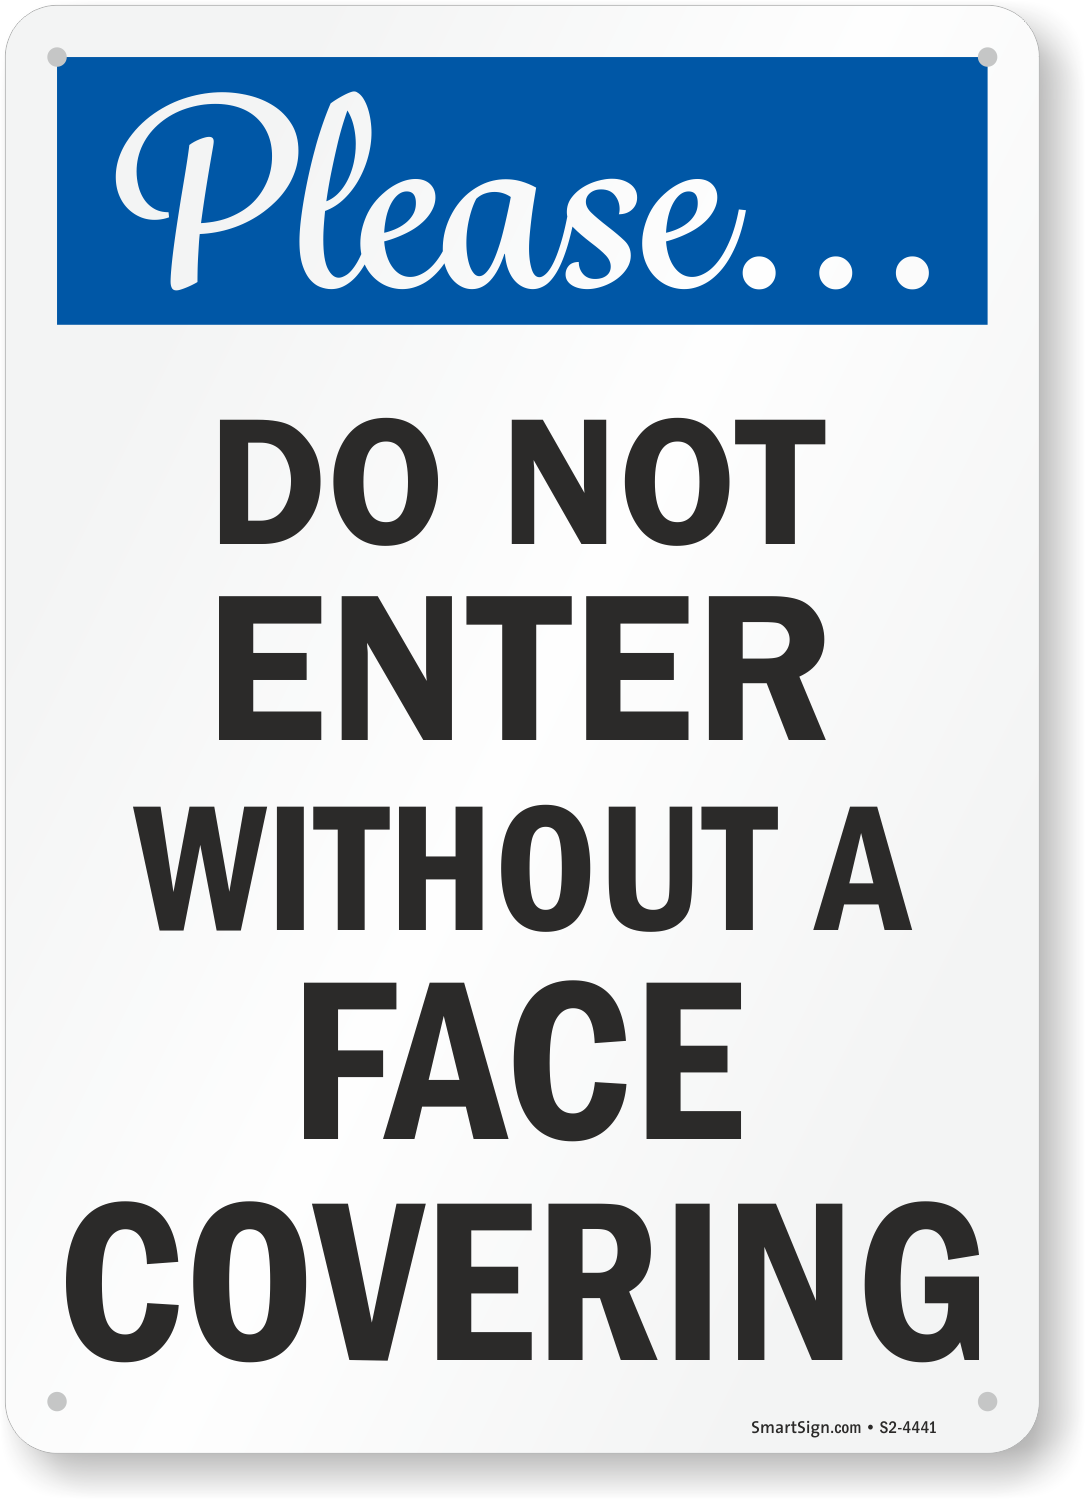 Please Do Not Enter Without a Face Covering Face Mask Safety Sign, SKU